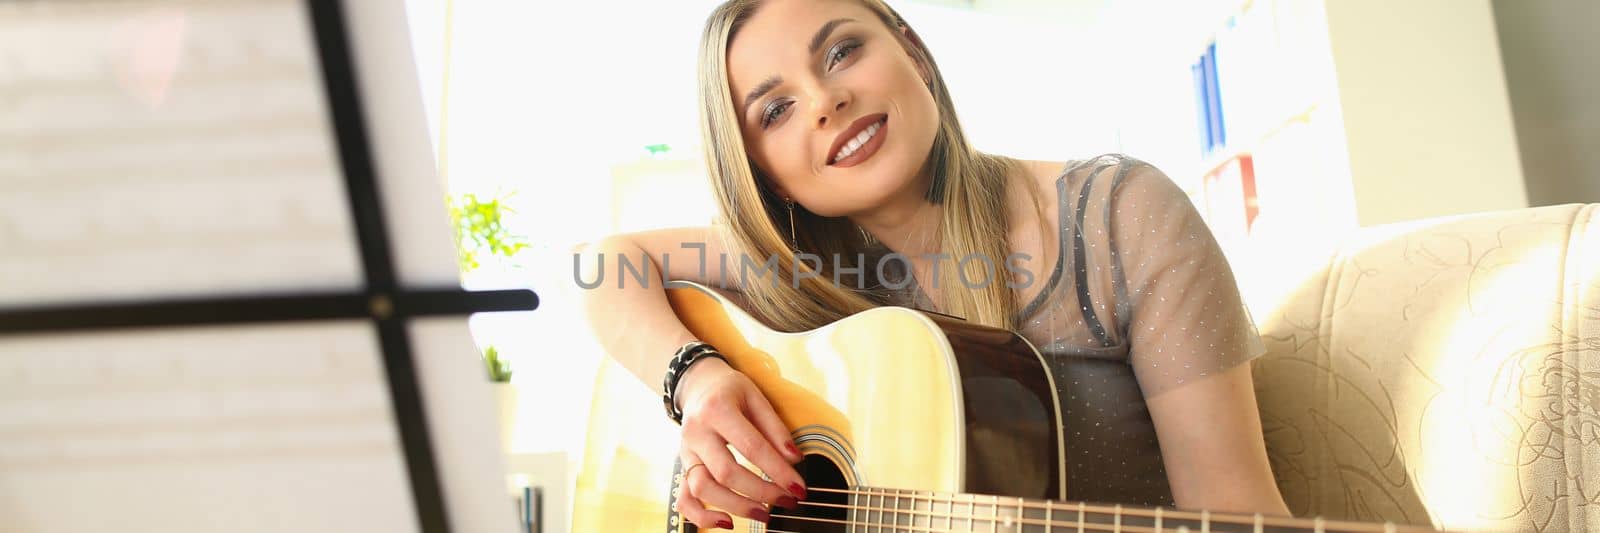 Smiling blond woman playing guitar and looking through notes by kuprevich